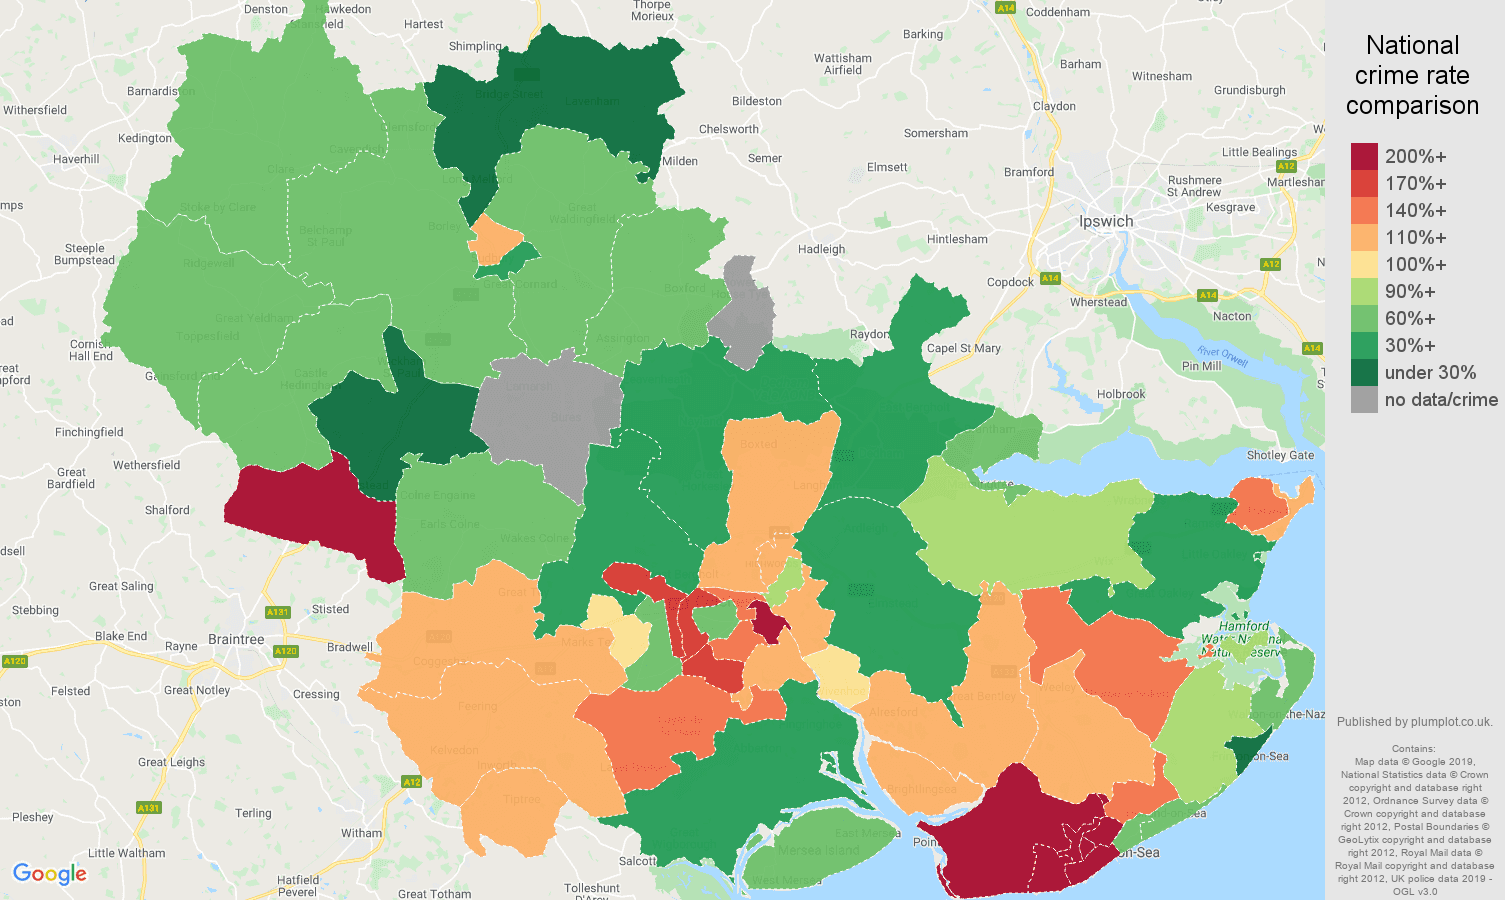 Colchester other crime rate comparison map